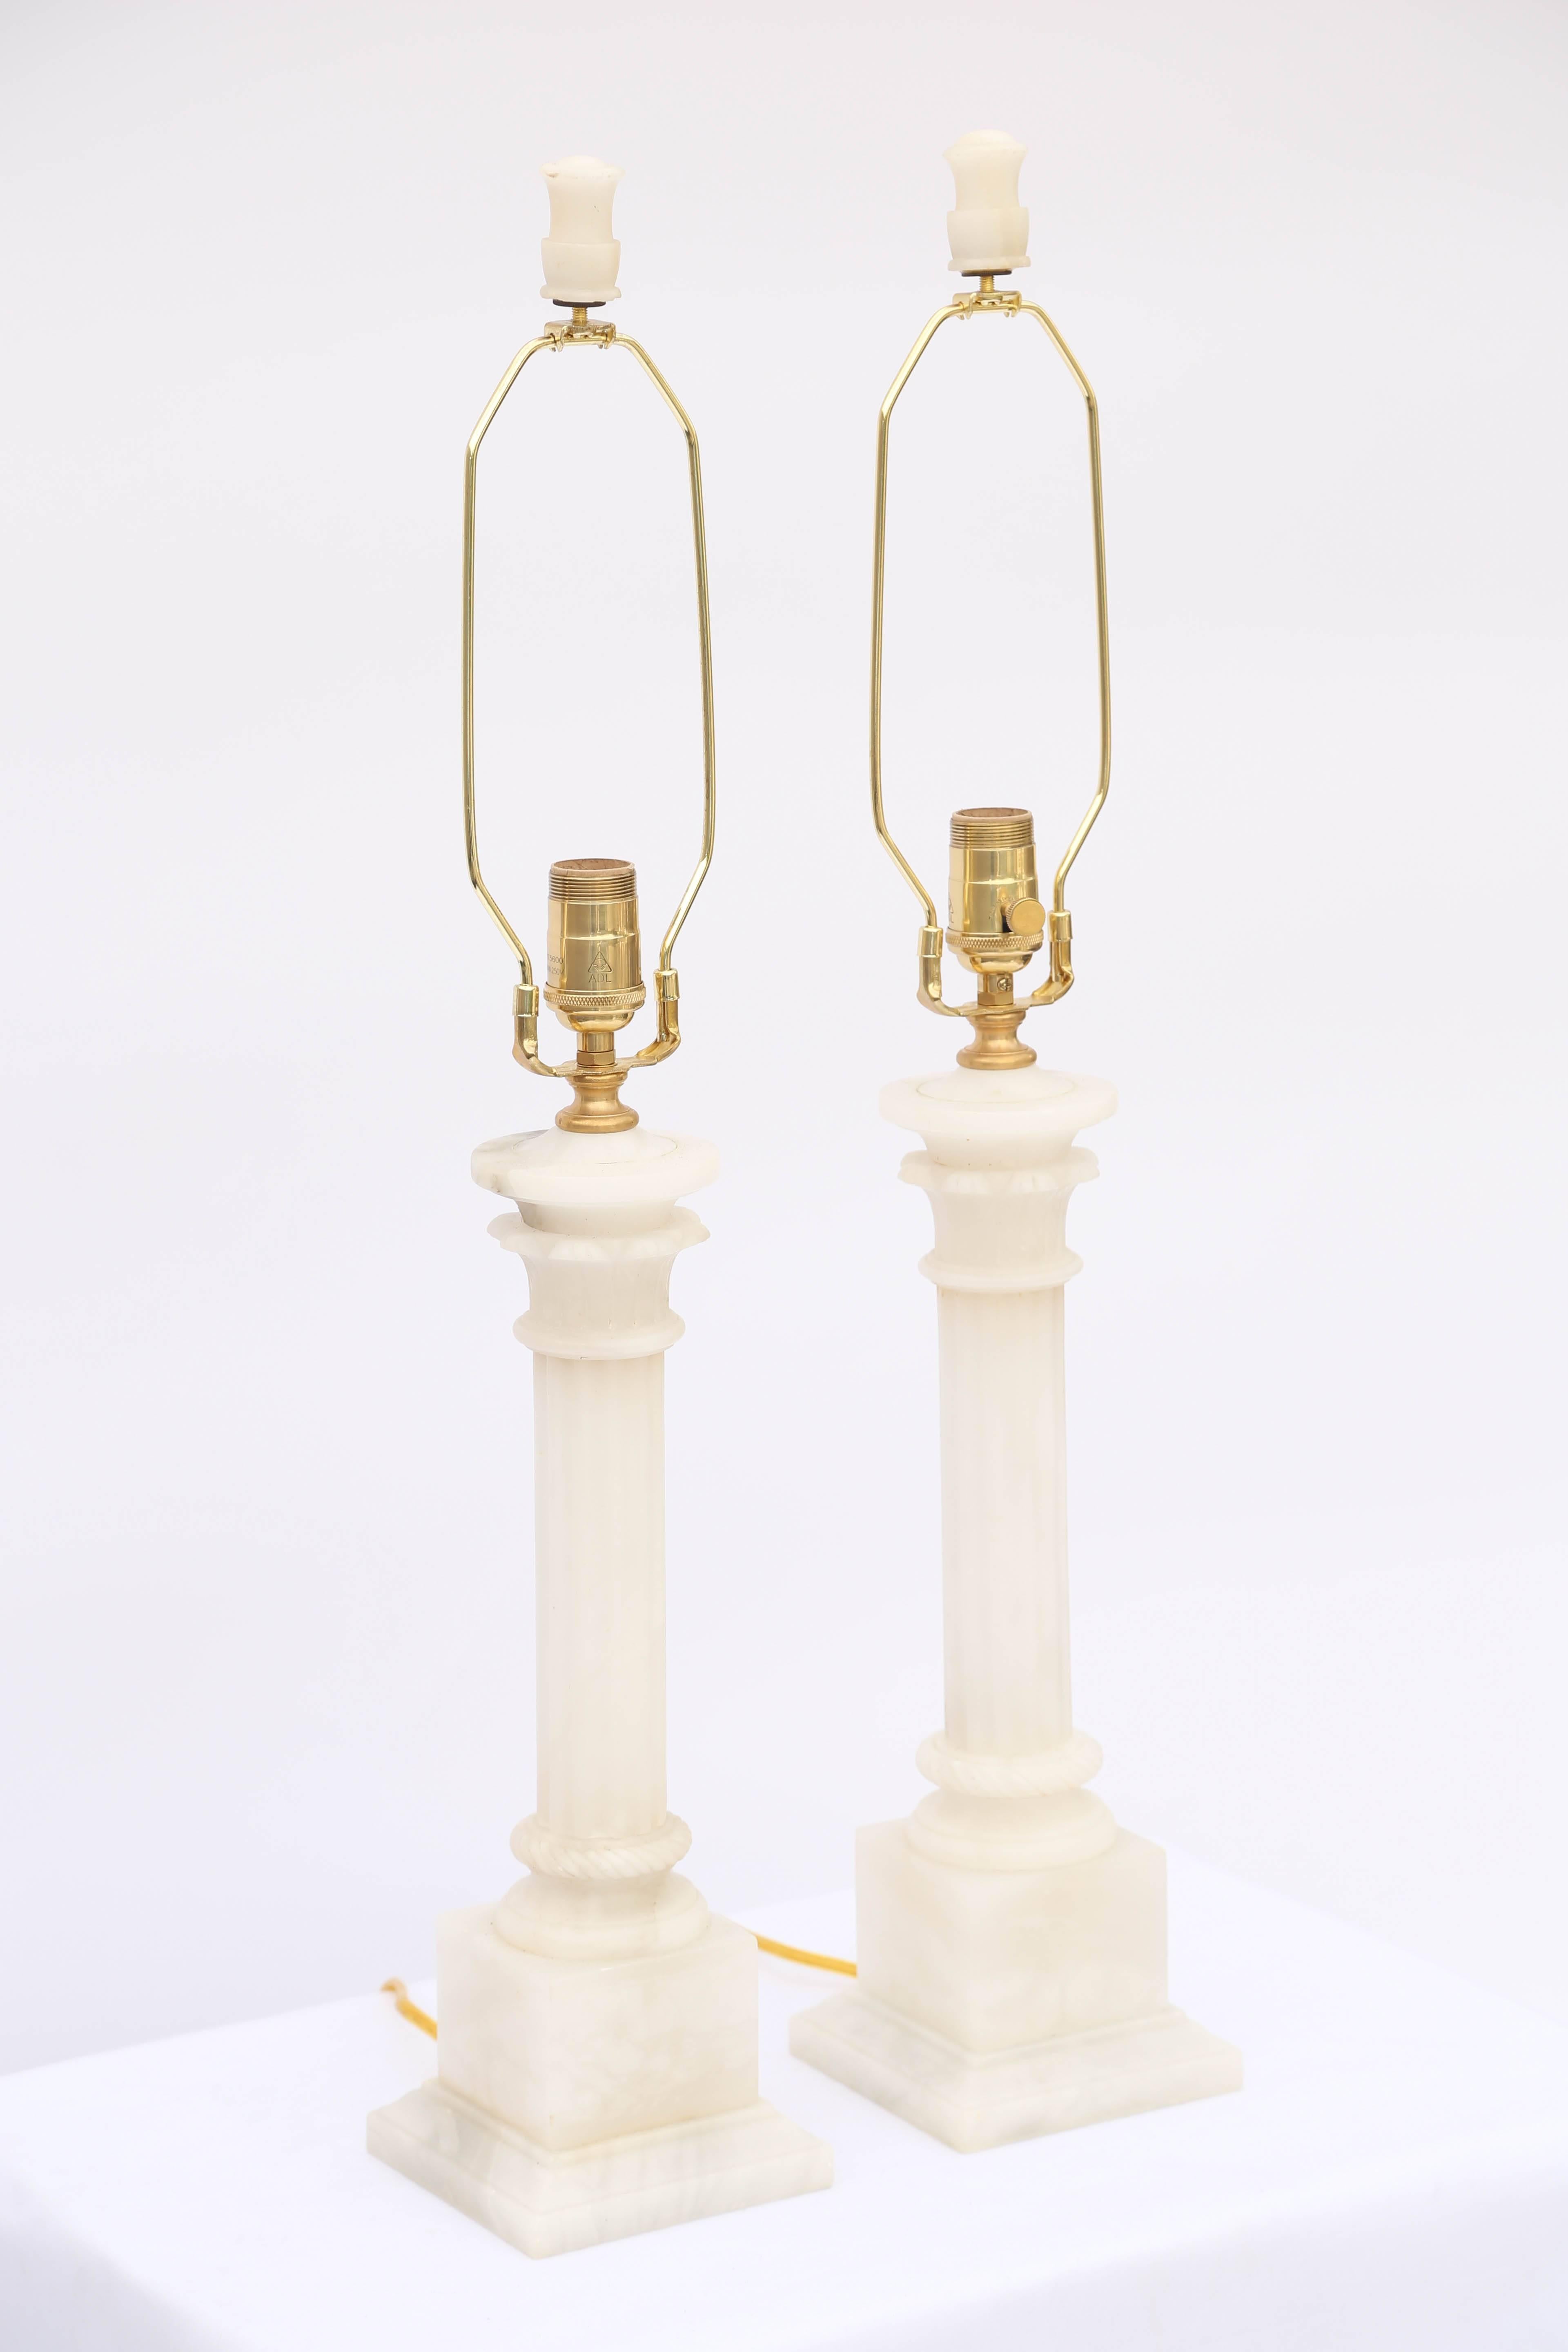 Pair of table lamps, of carved alabaster, each a round, fluted column with stylized capital, its round foot base on graduating square plinth. With matching finial.

Measured to top of socket. 

Stock ID: D6546.